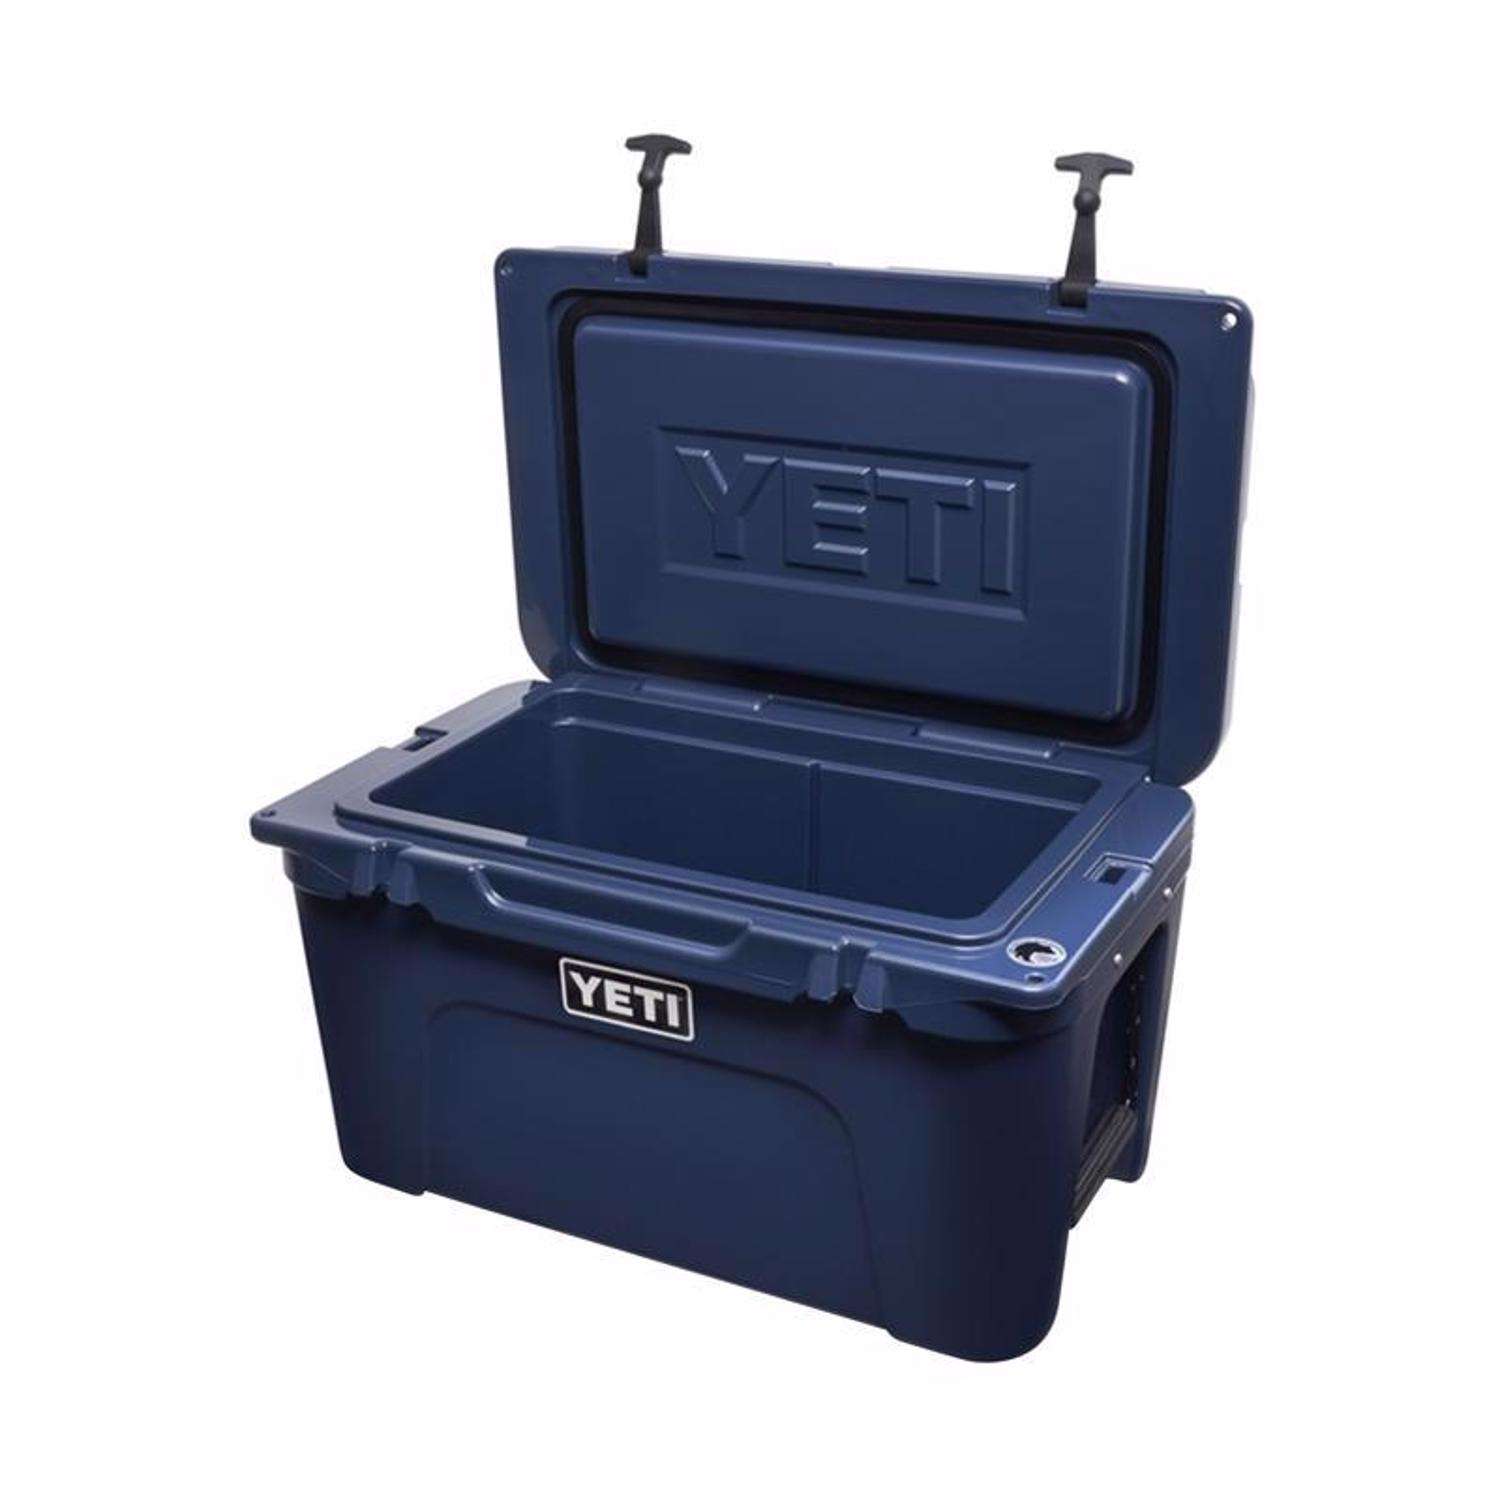 Yeti coolers, gear bags part of joint recall in U.S., Canada